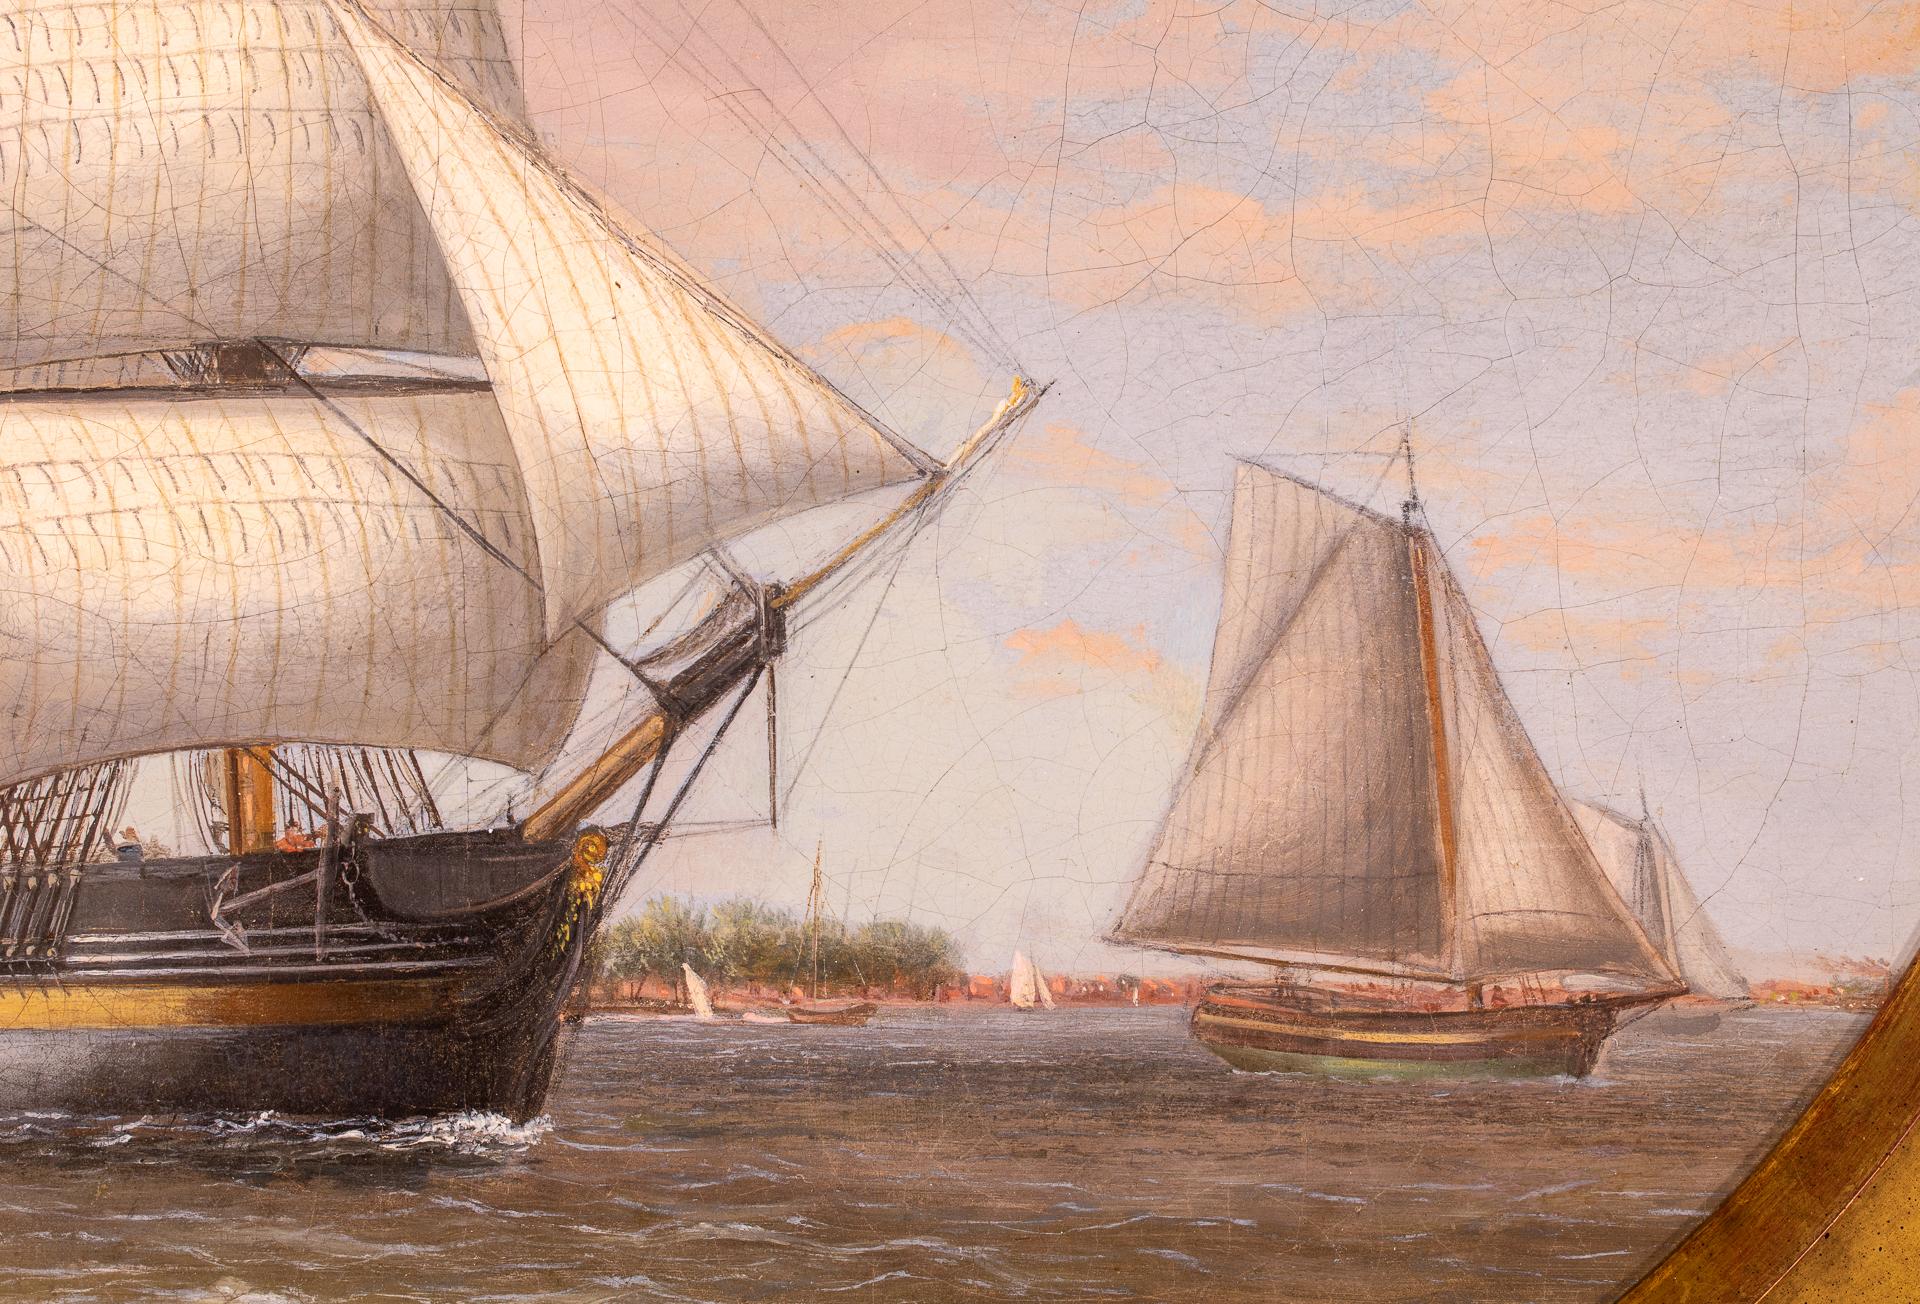 Thomas Birch is considered one of the earliest American Marine painters of importance both in his own time and historically, forming the foundation of what would become a great American Maritime movement in the successive years of the 19th